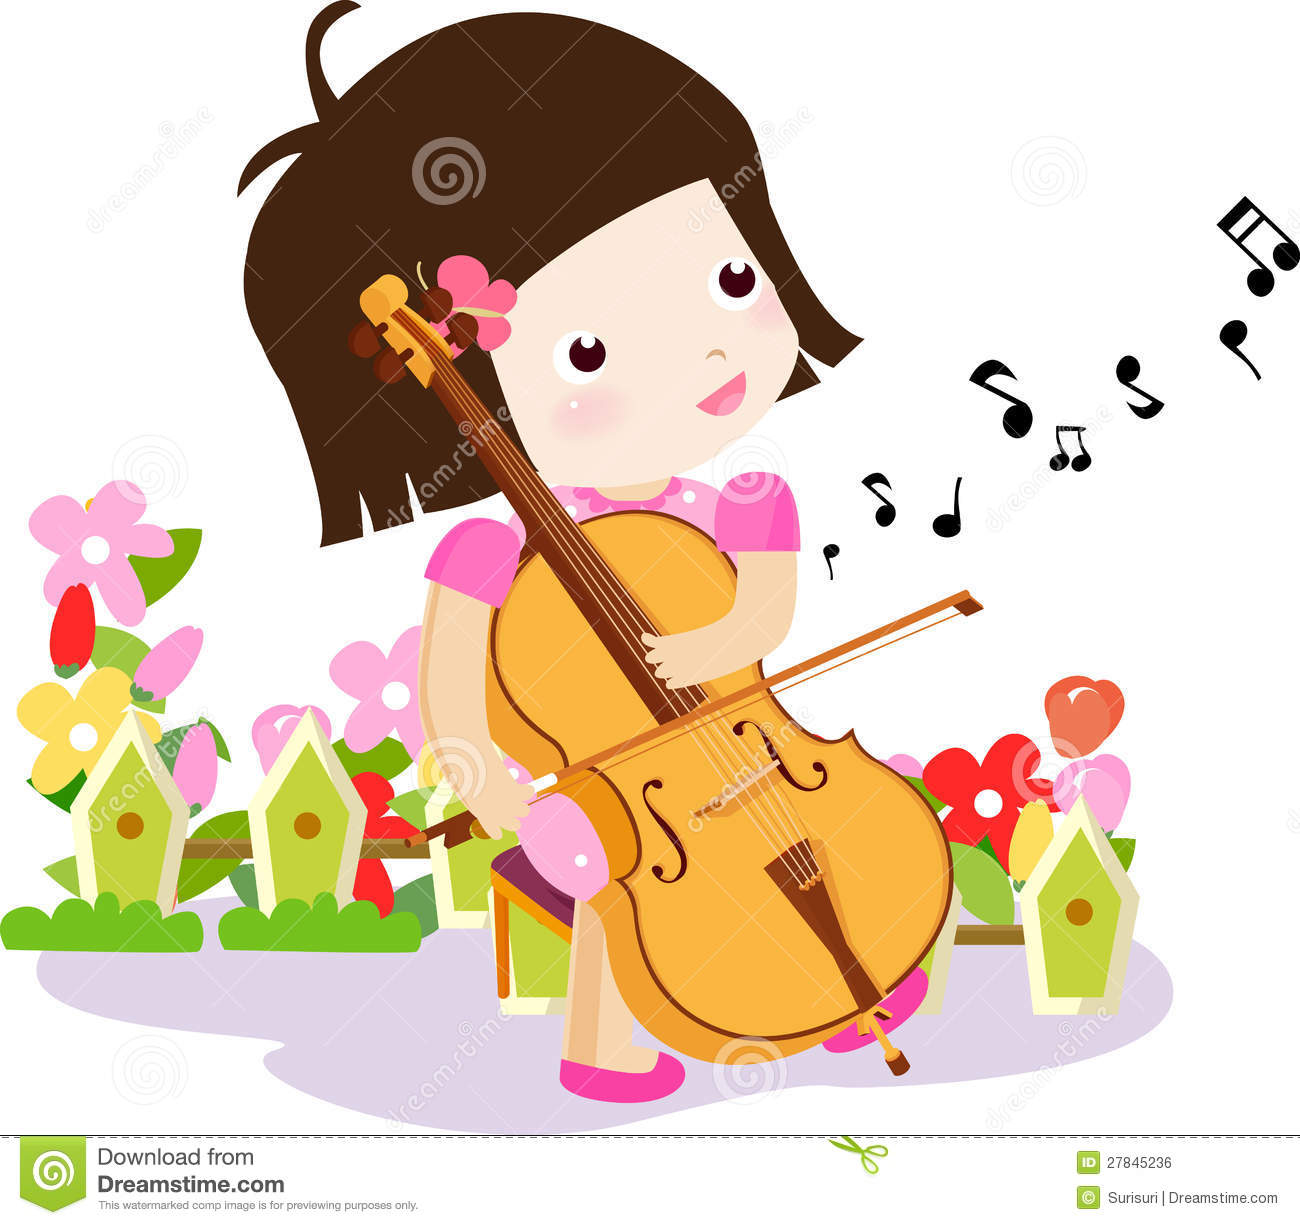 Girl Playing A Cello Royalty Free Stock Image   Image  27845236